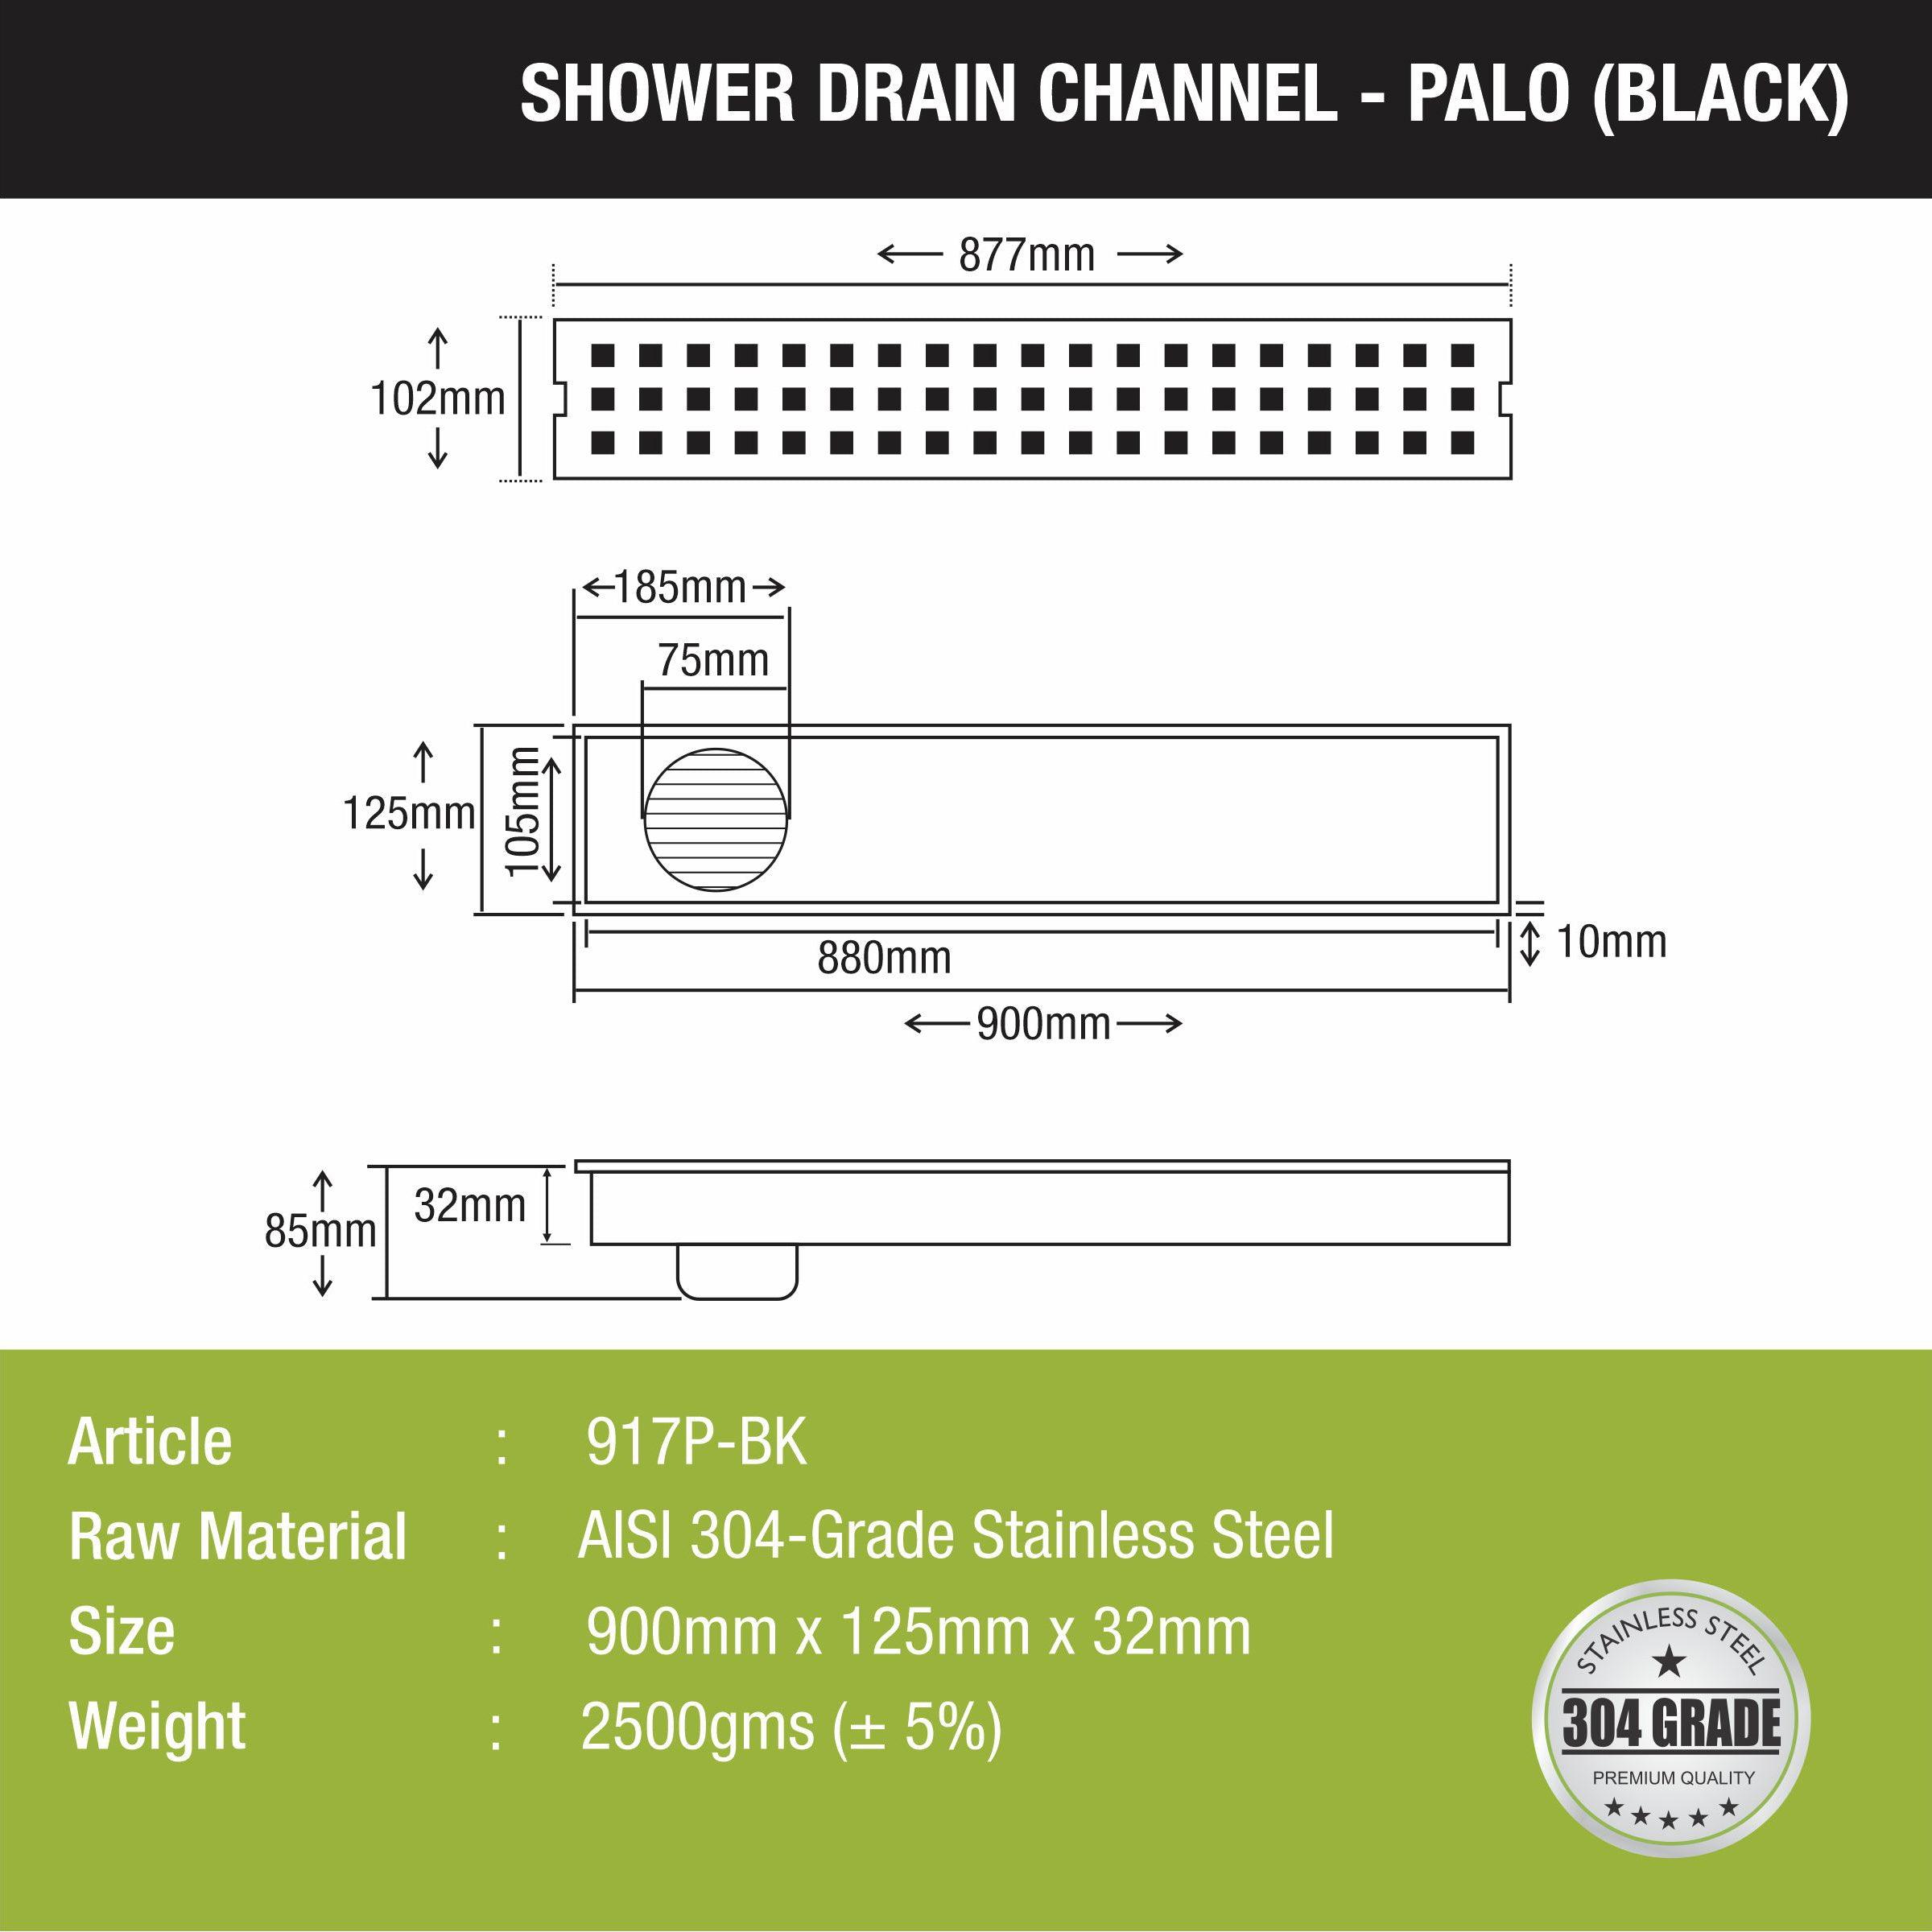 Palo Shower Drain Channel - Black (36 x 5 Inches) size and measurement